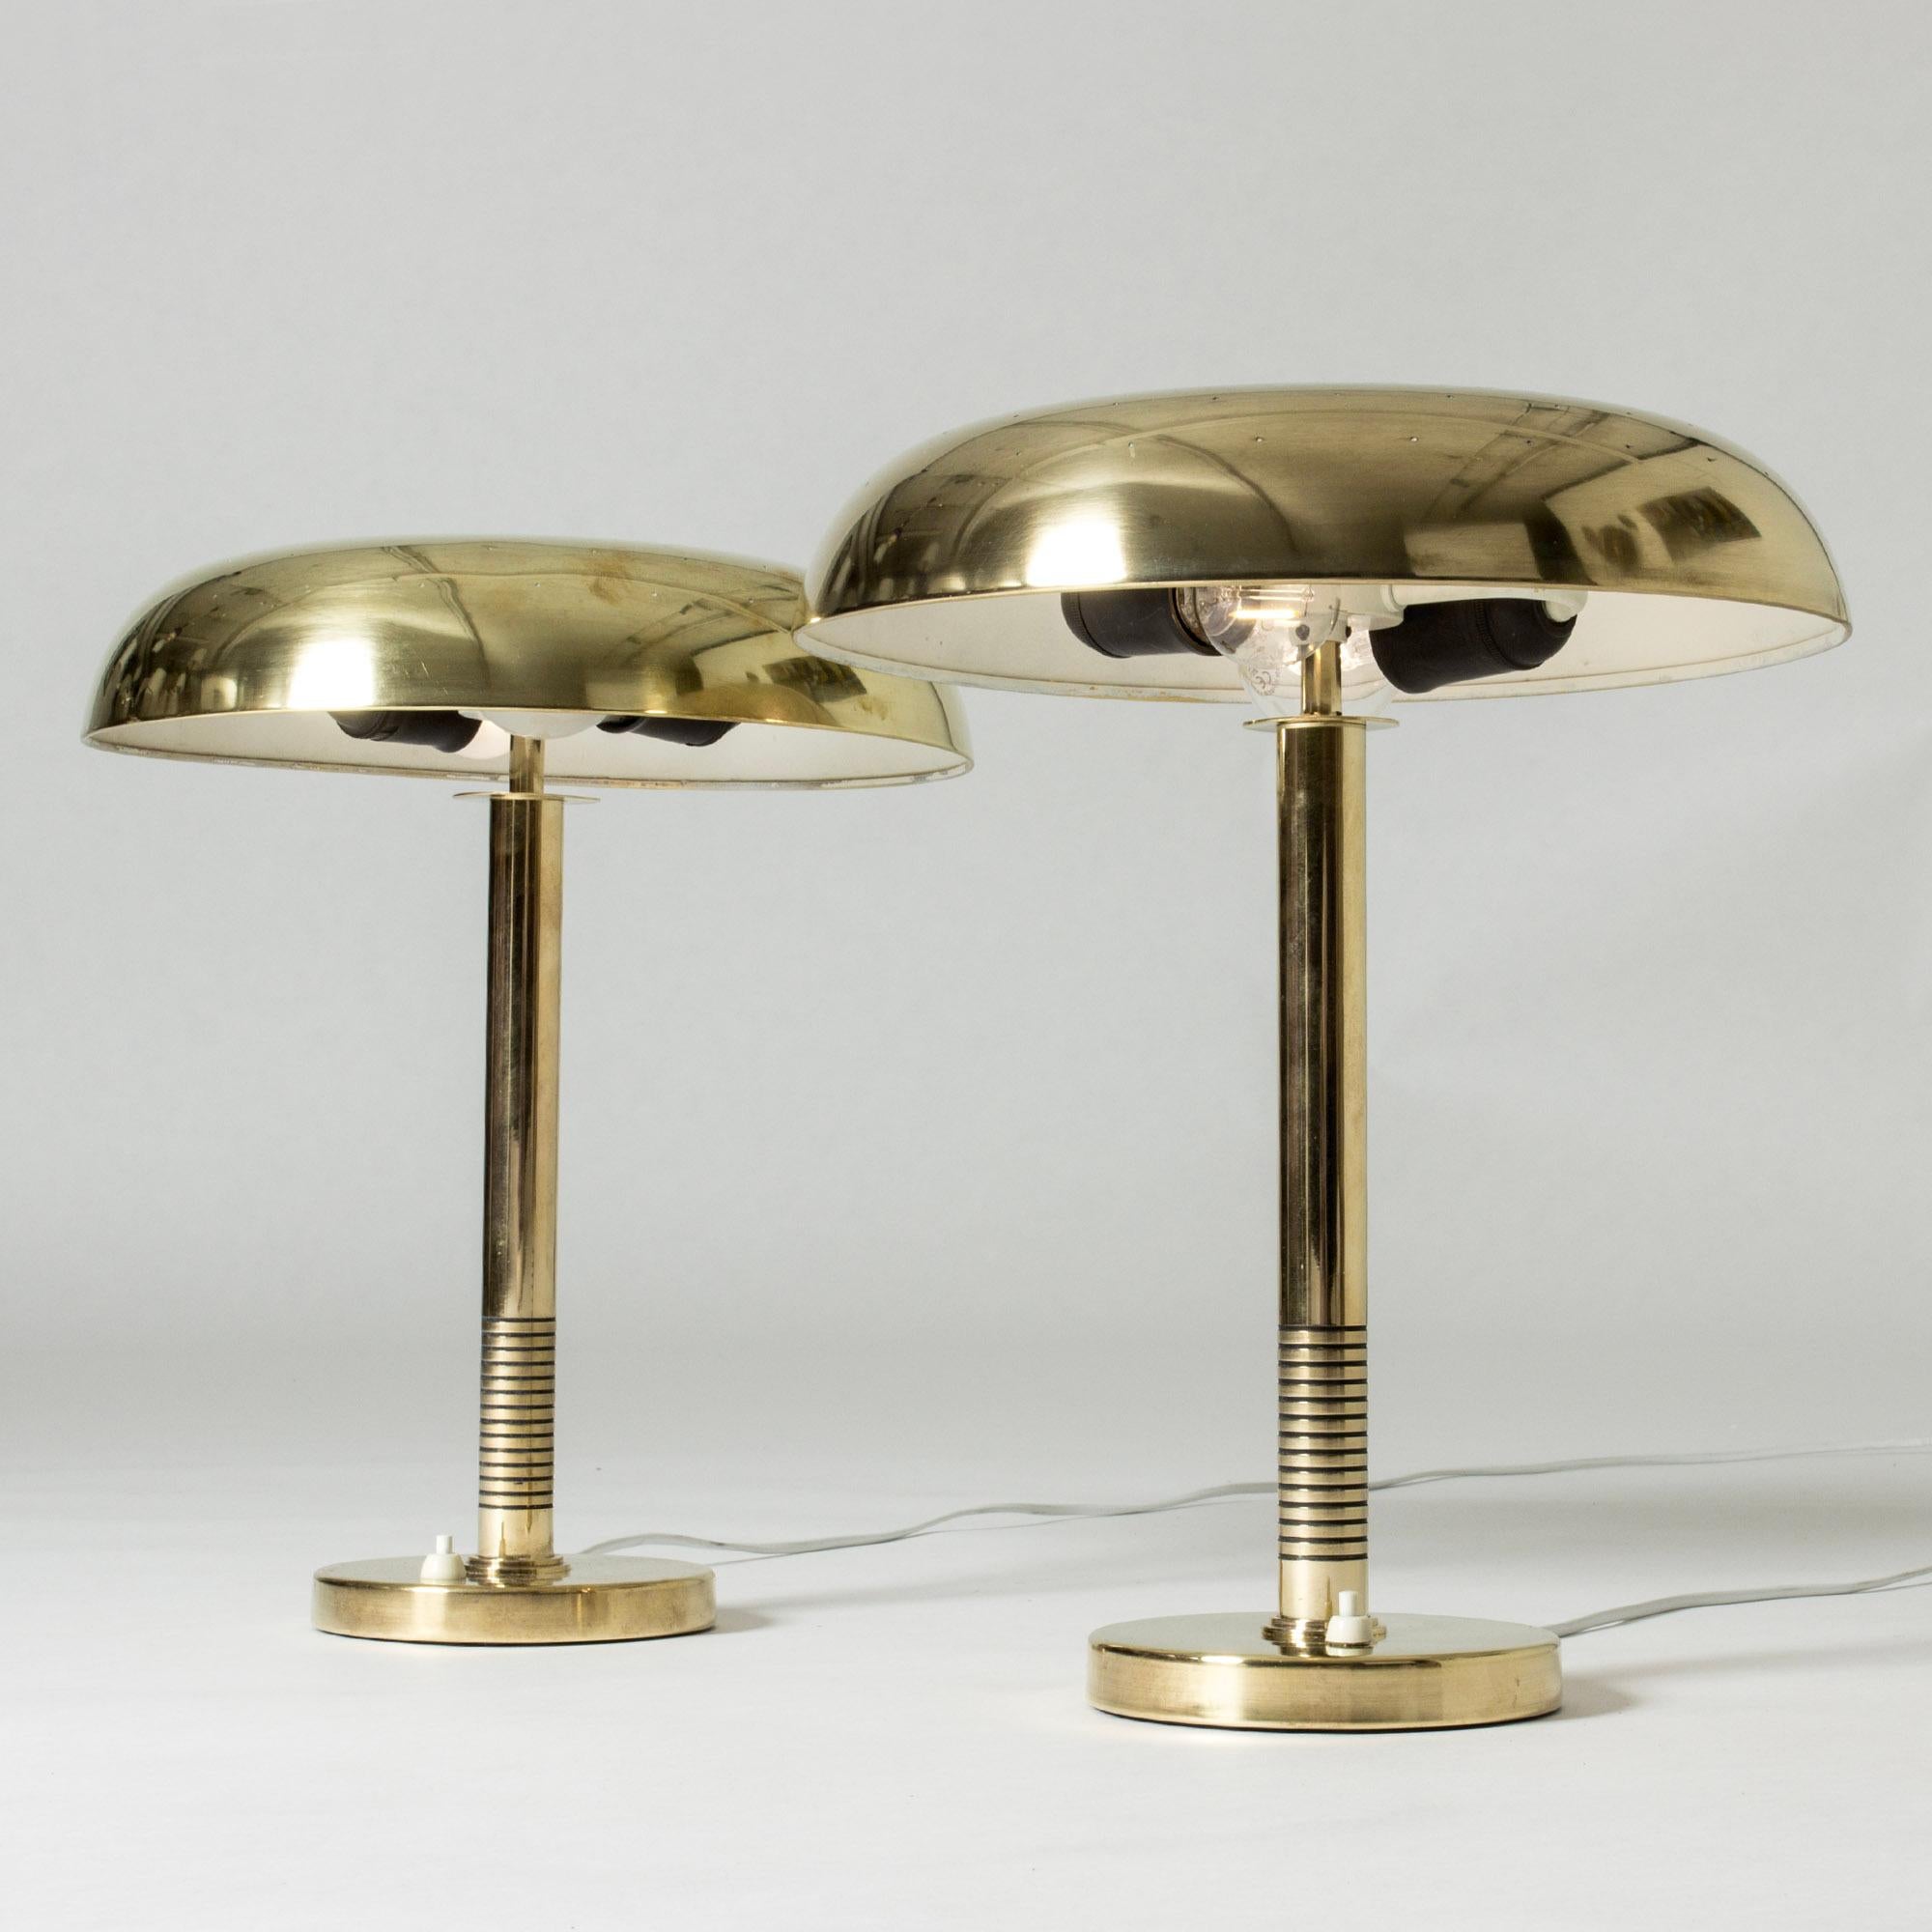 Mid-20th Century Midcentury Modern Brass Table Lamps, Boréns, Sweden, 1950s For Sale